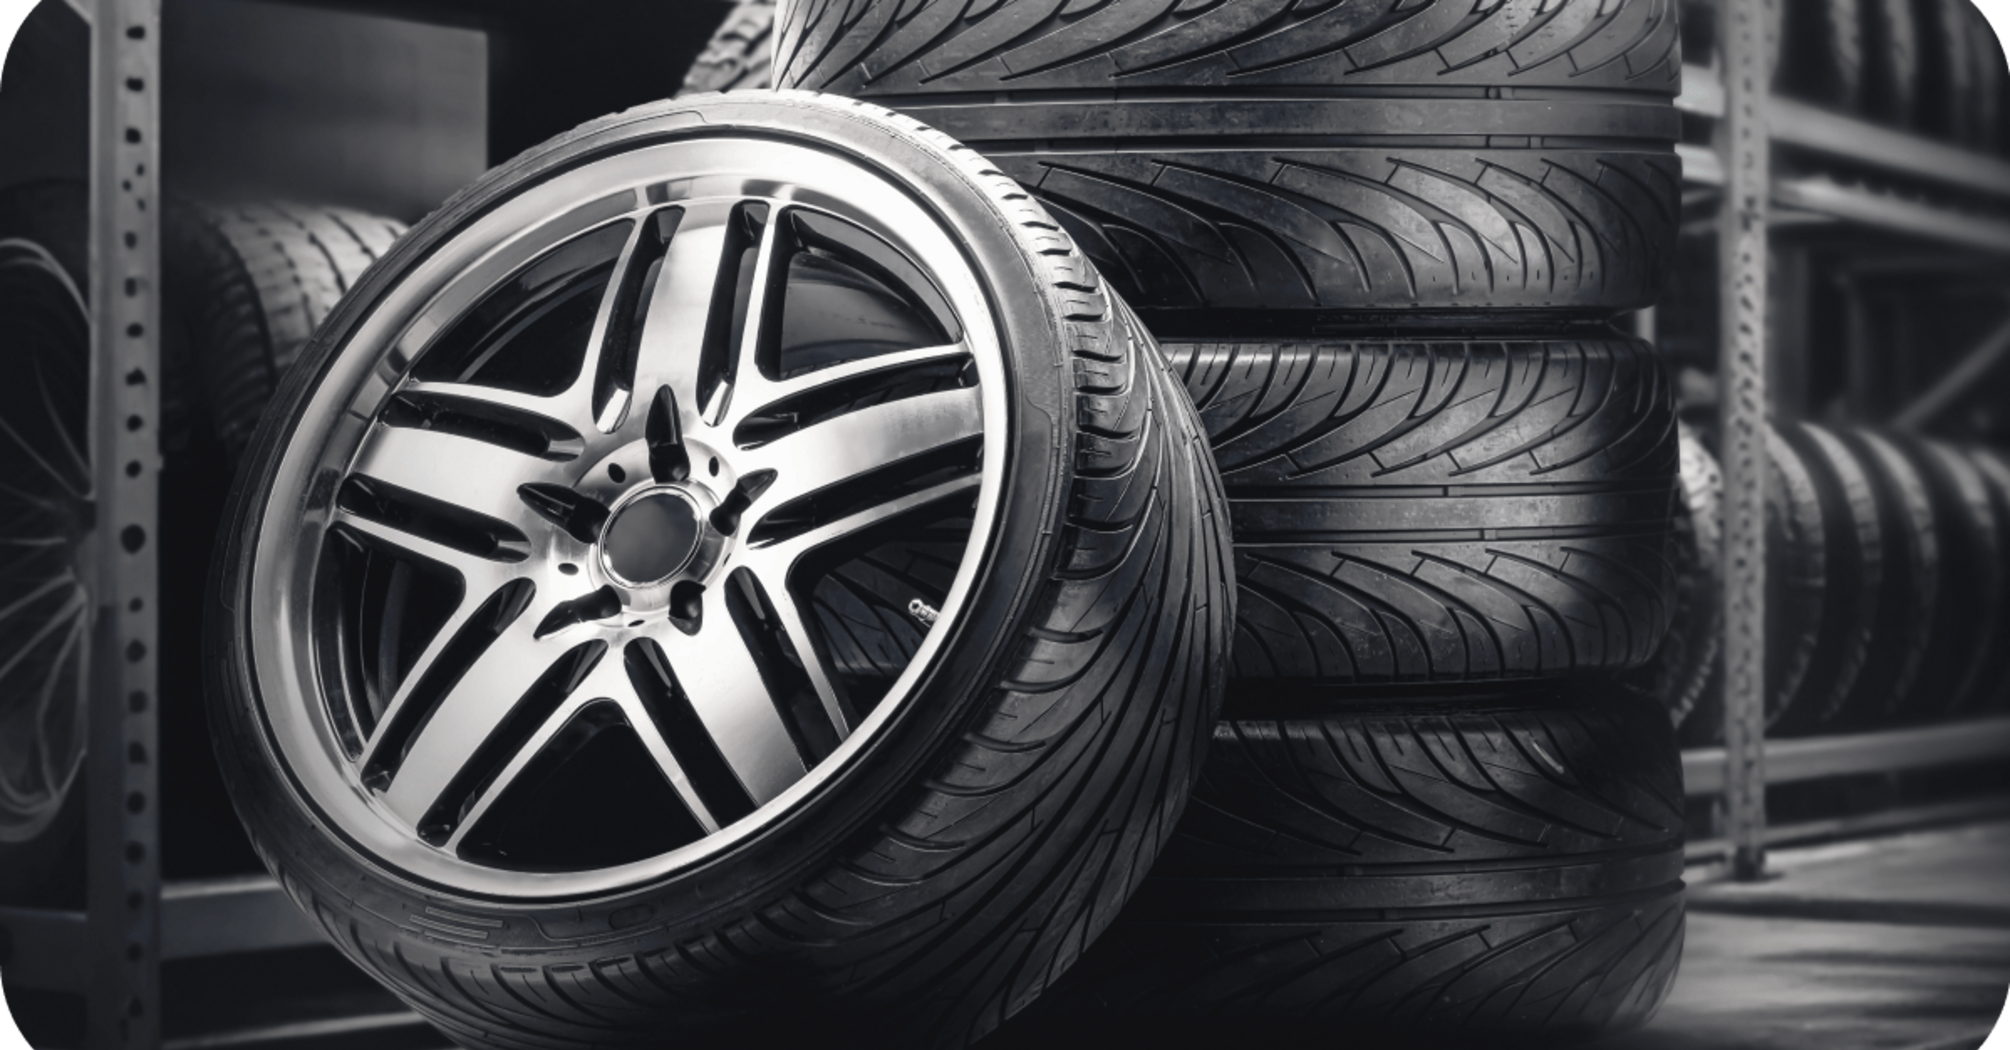 How to choose the right wheels for your car